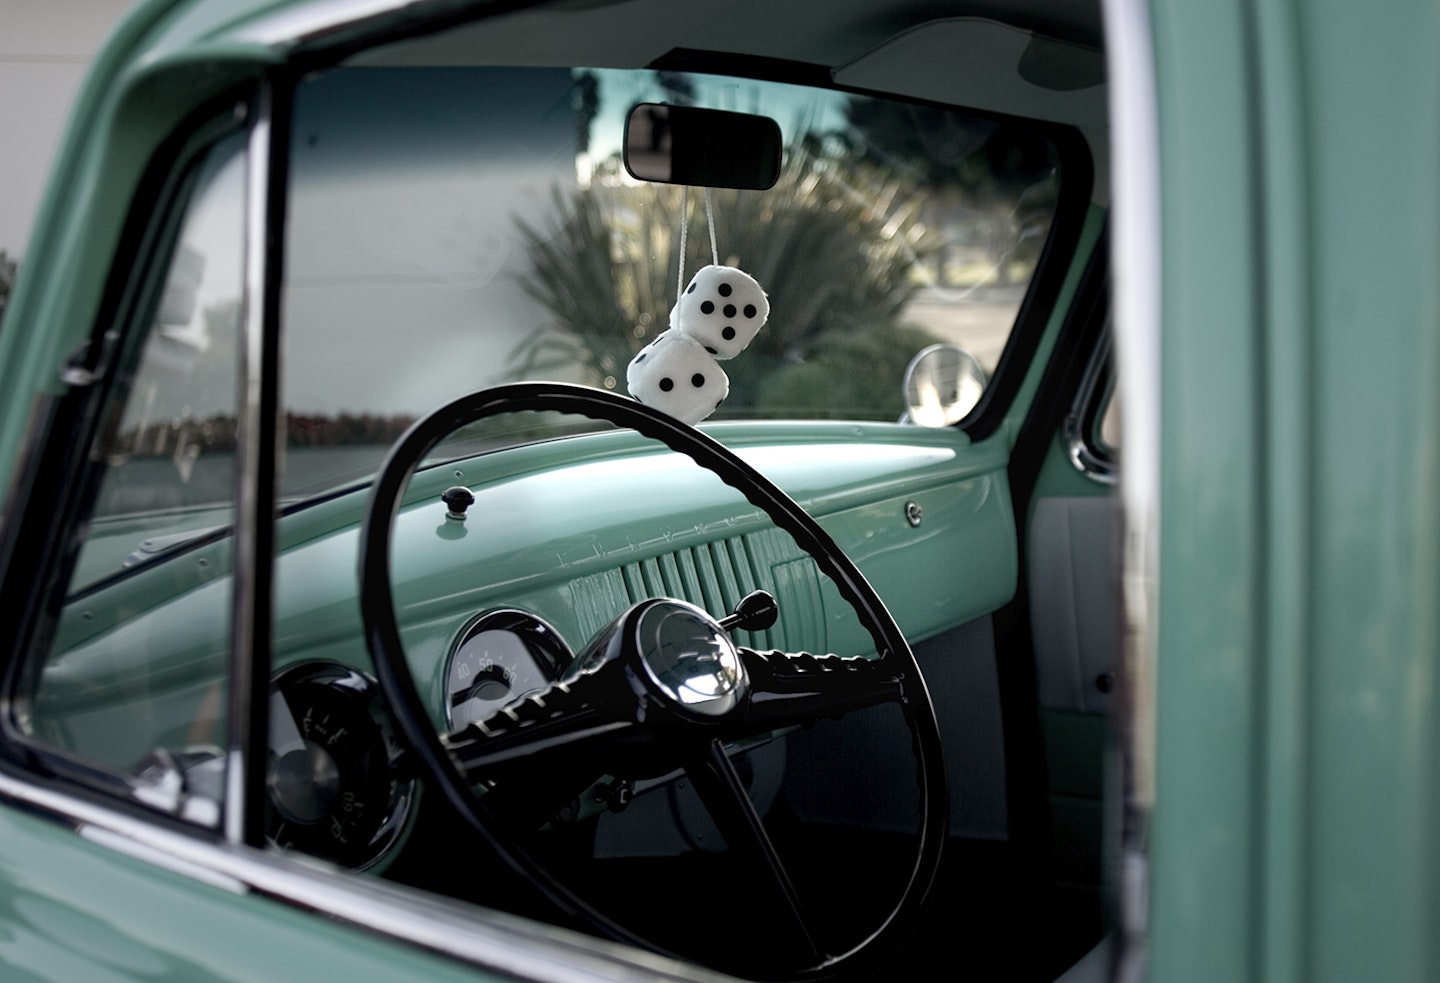 Fluffy dice in an old car